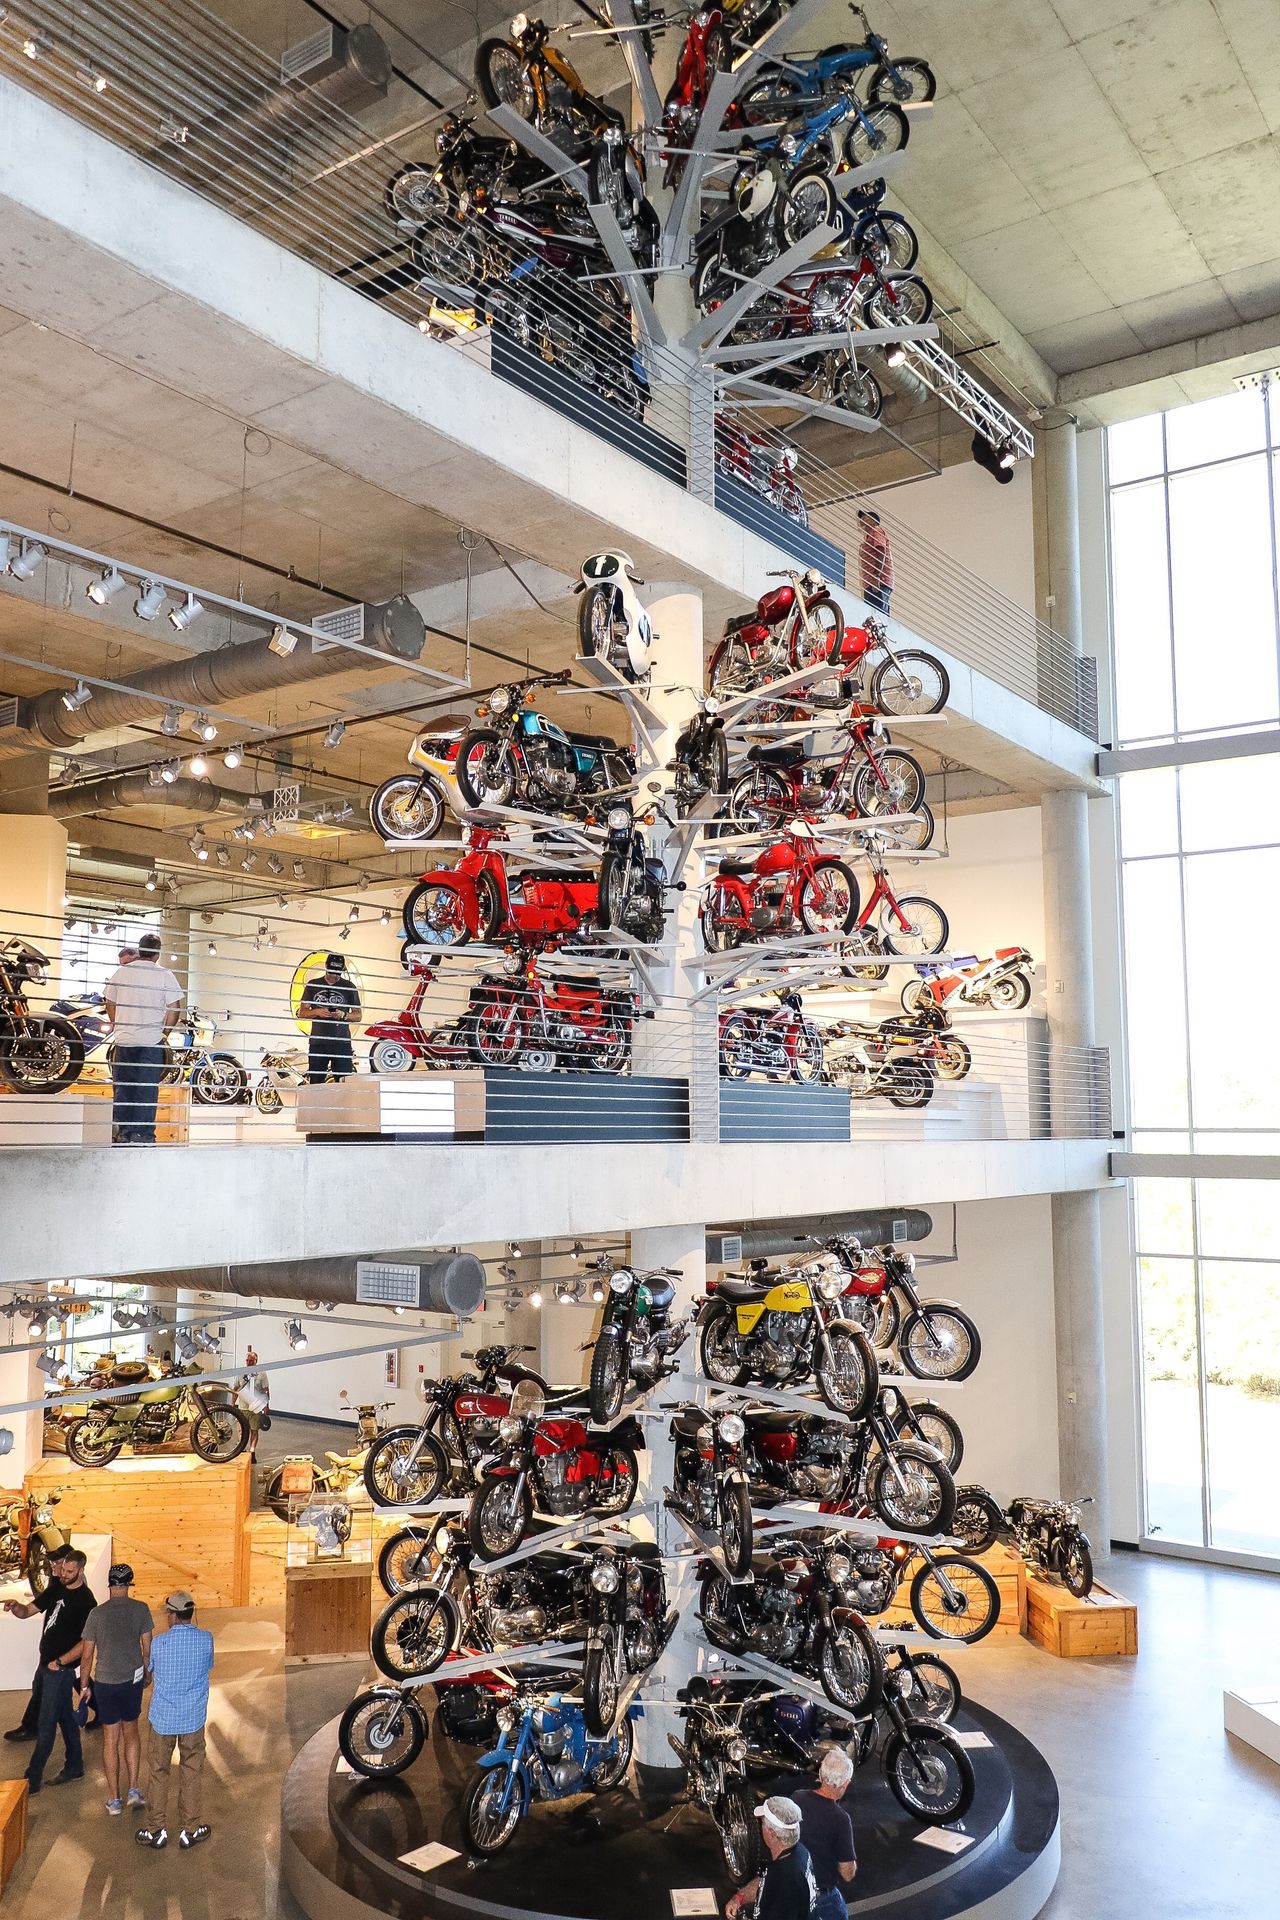 A tree of motorcycles!